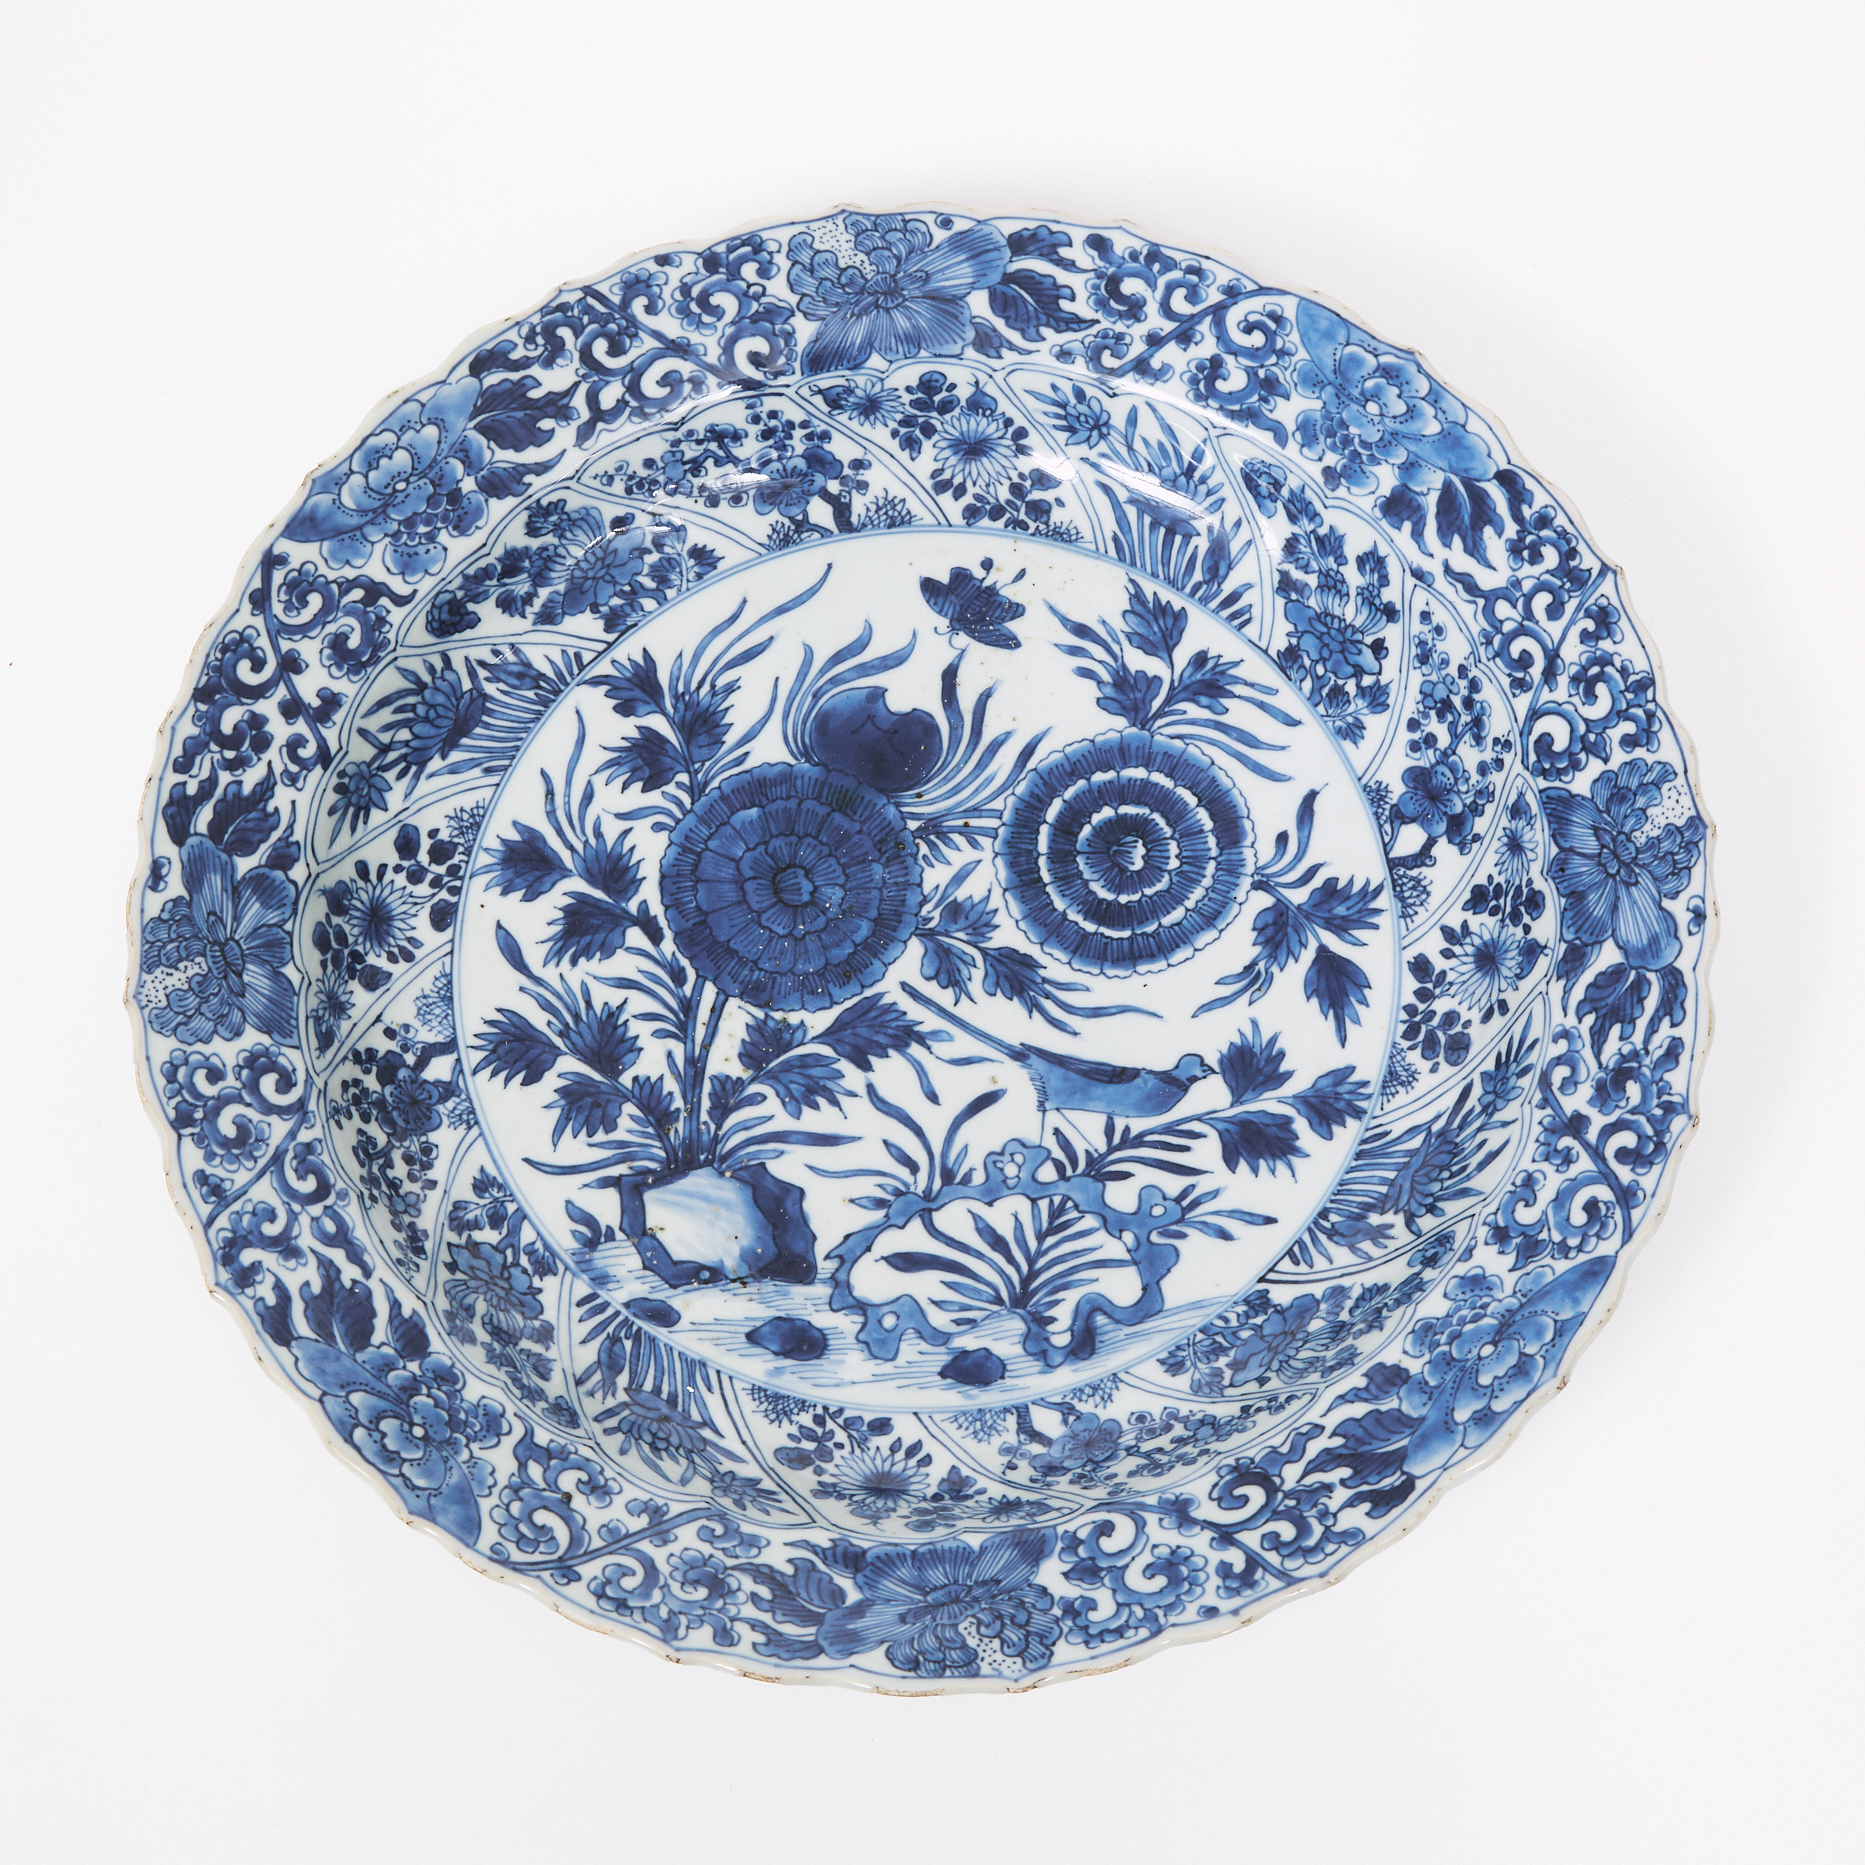 A Large Blue and White Lobed Charger, Early Kangxi Period